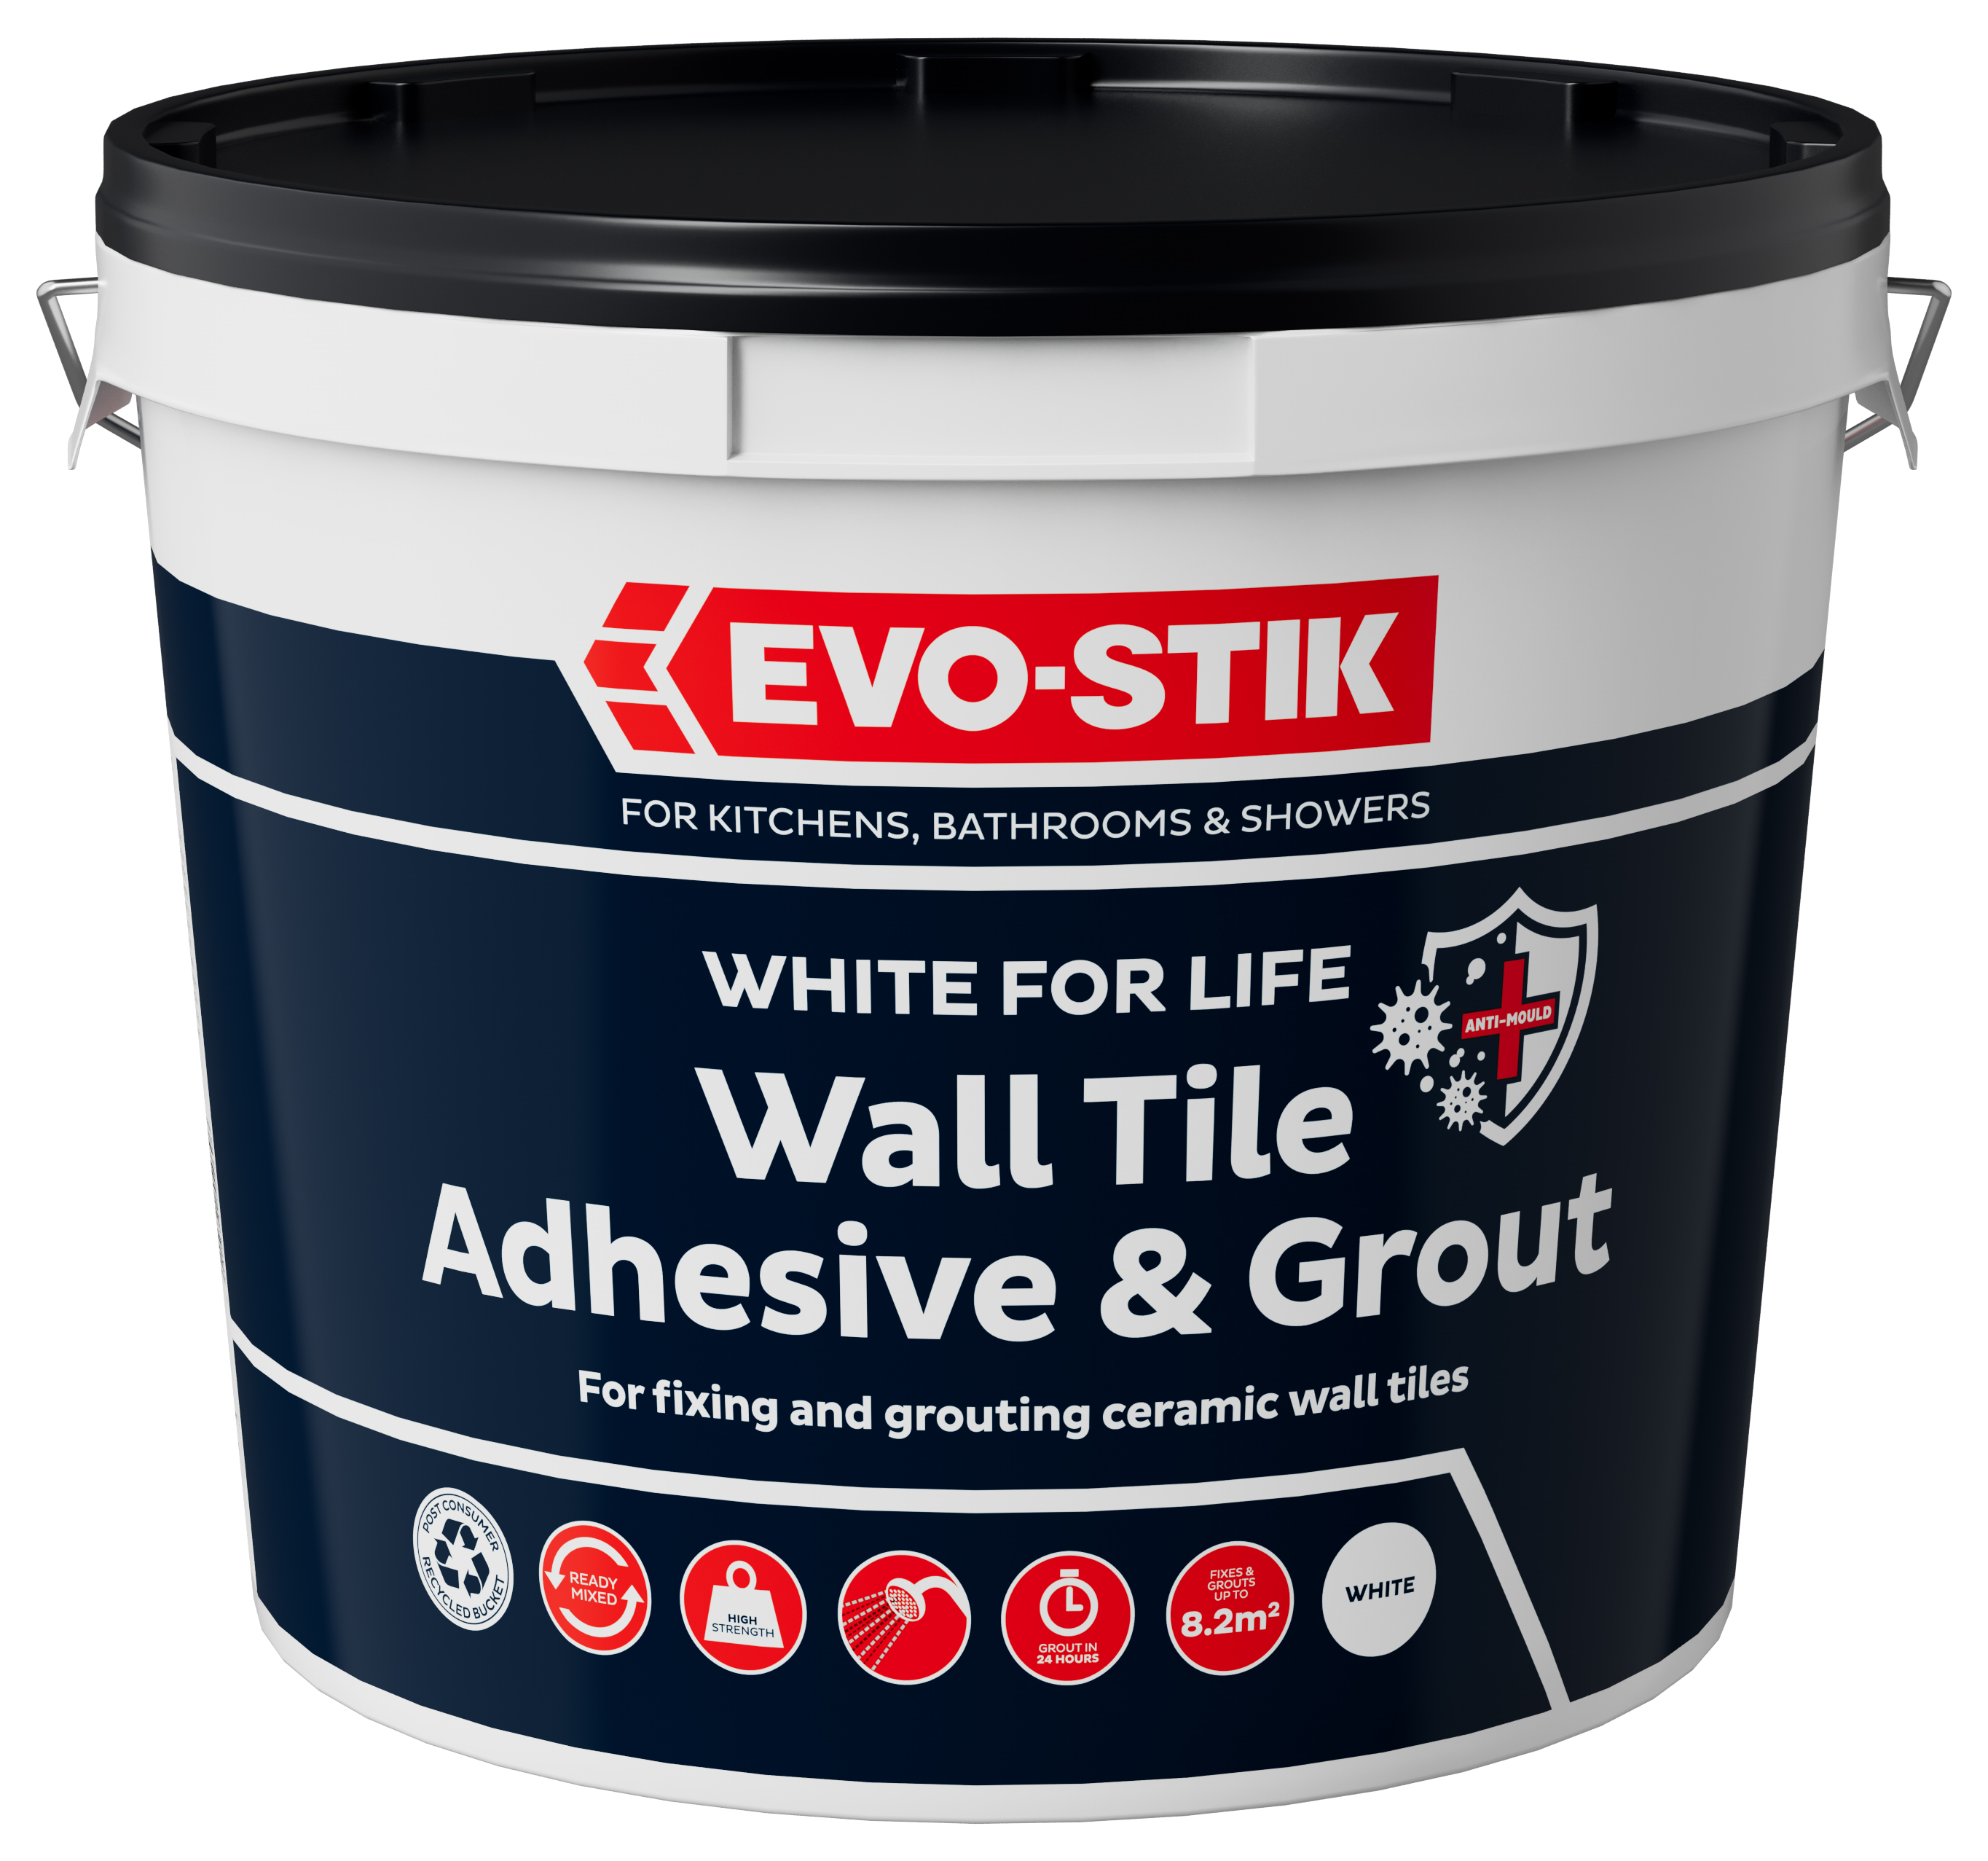 Image of EVO-STIK 10L White for Life Wall Tile Adhesive & Grout - White